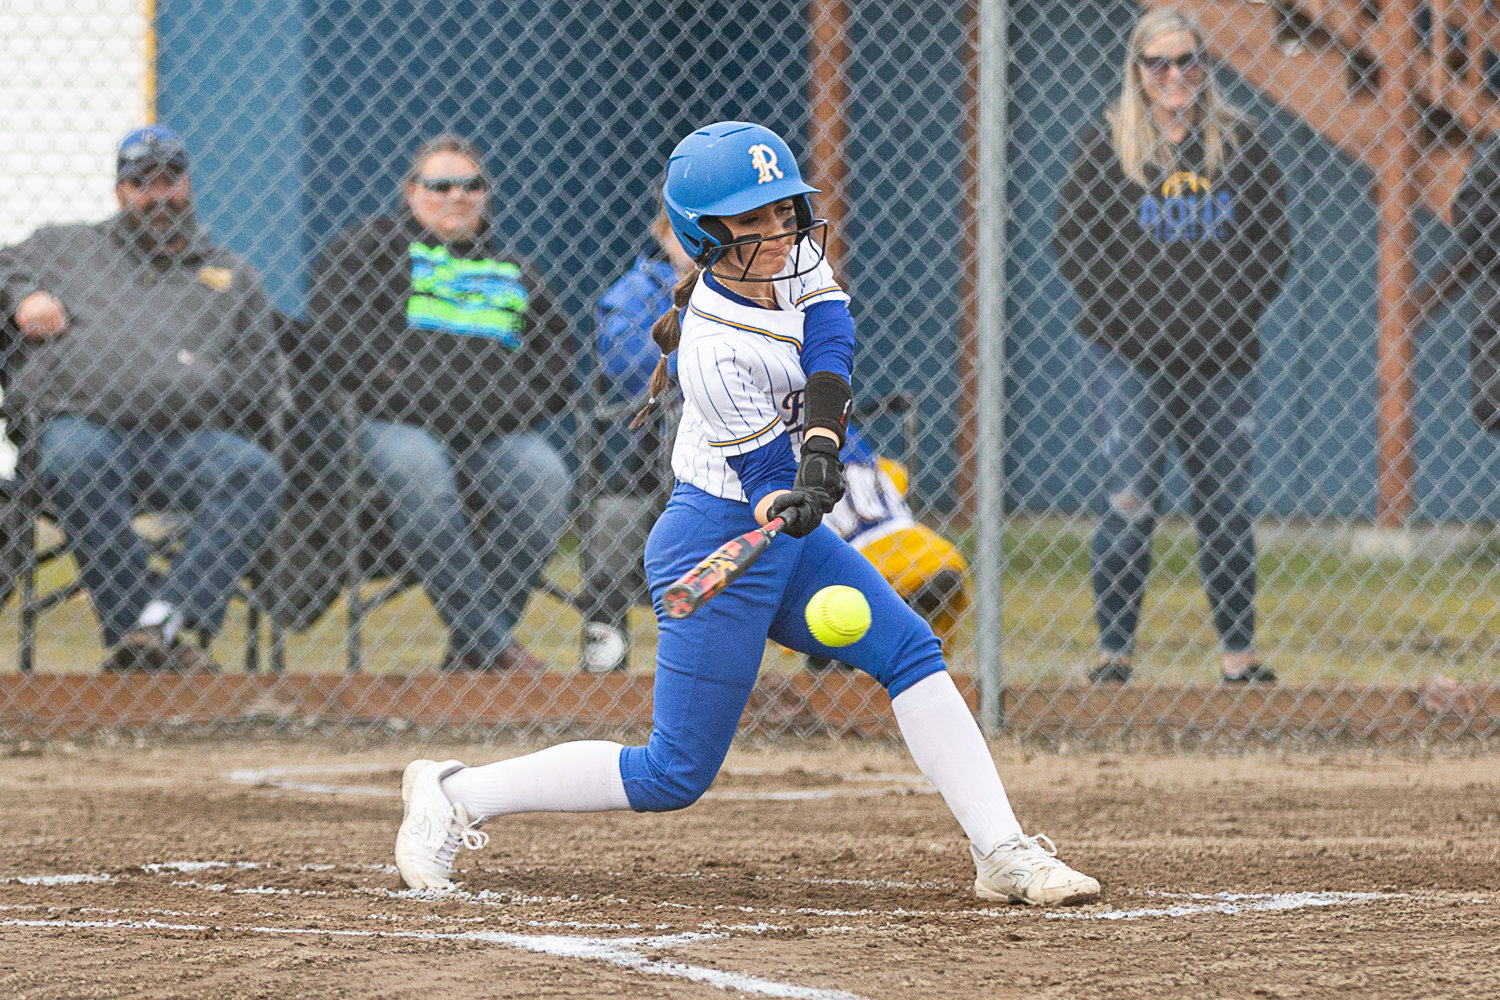 Rochester's Jessa Lenzi swings at a pitch against Adna March 15.